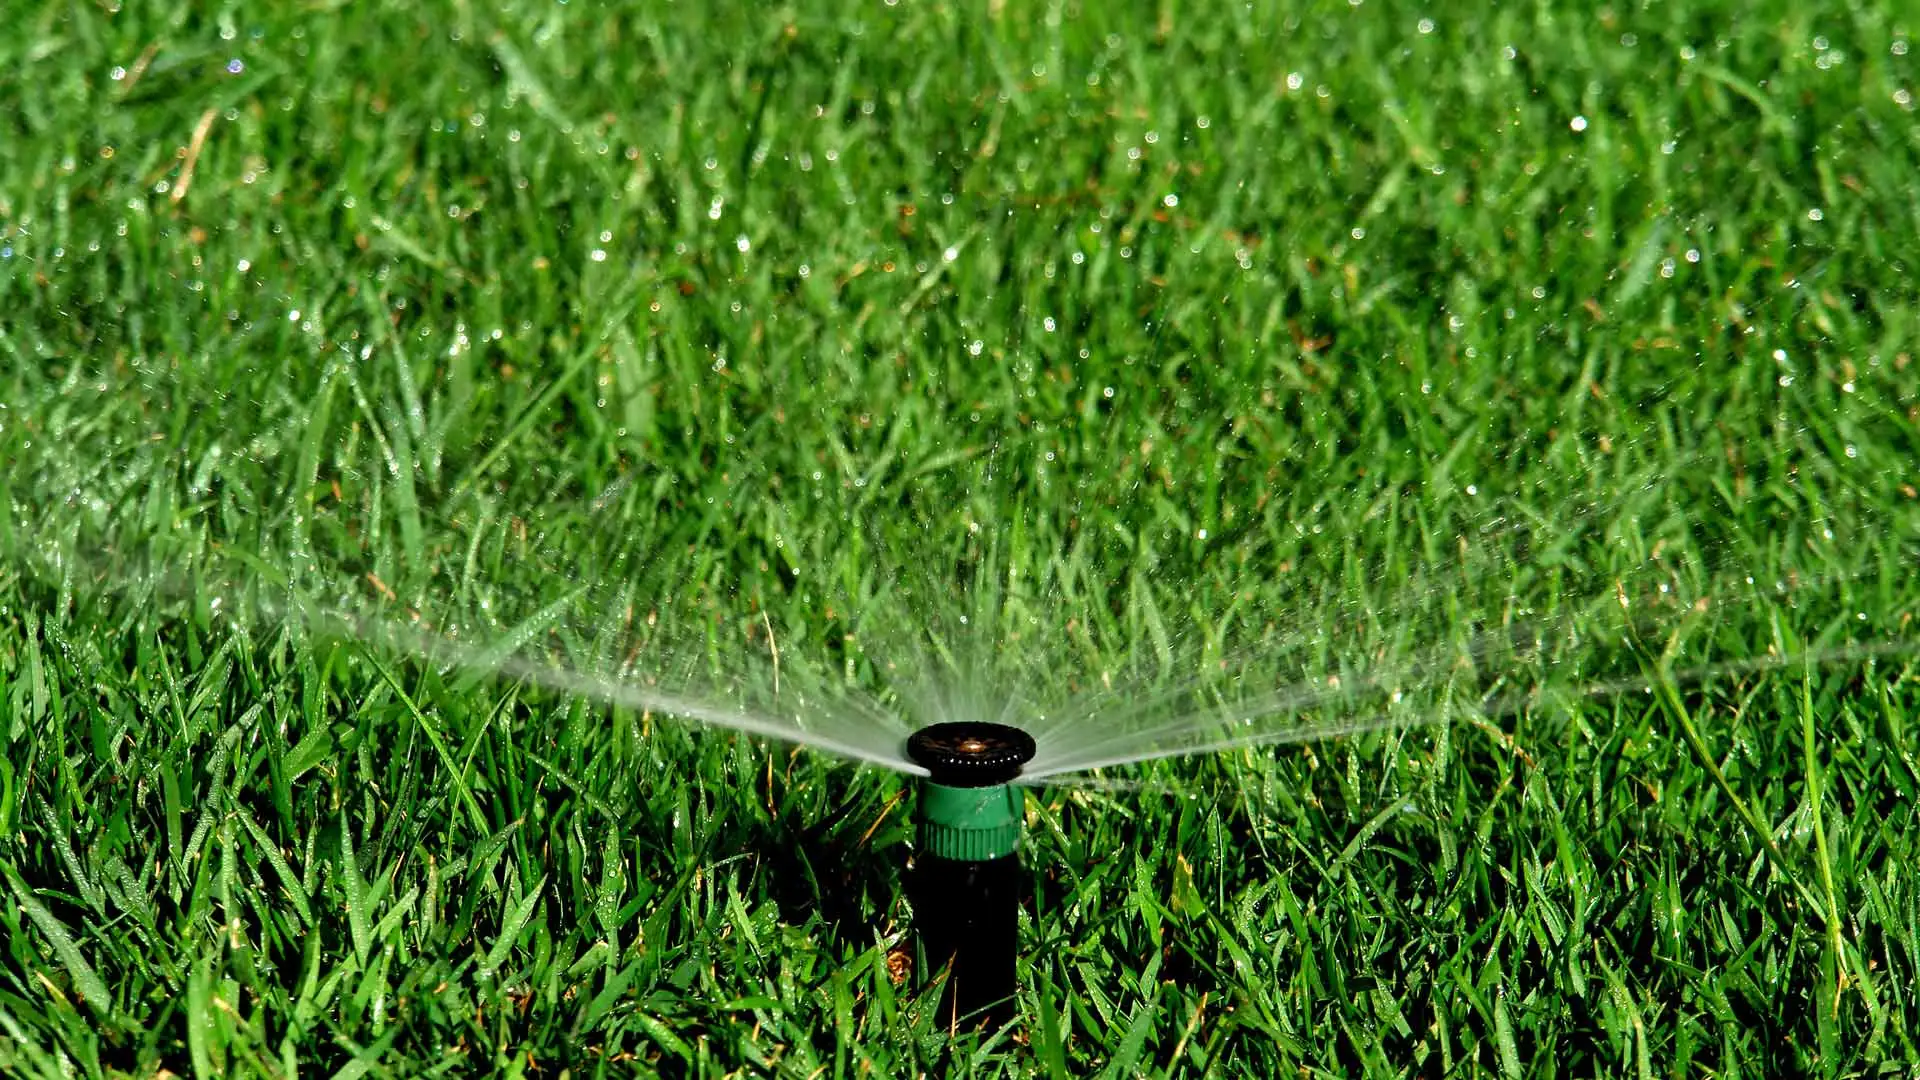 Now Is the Time To Schedule Your Professional Irrigation Startup Service